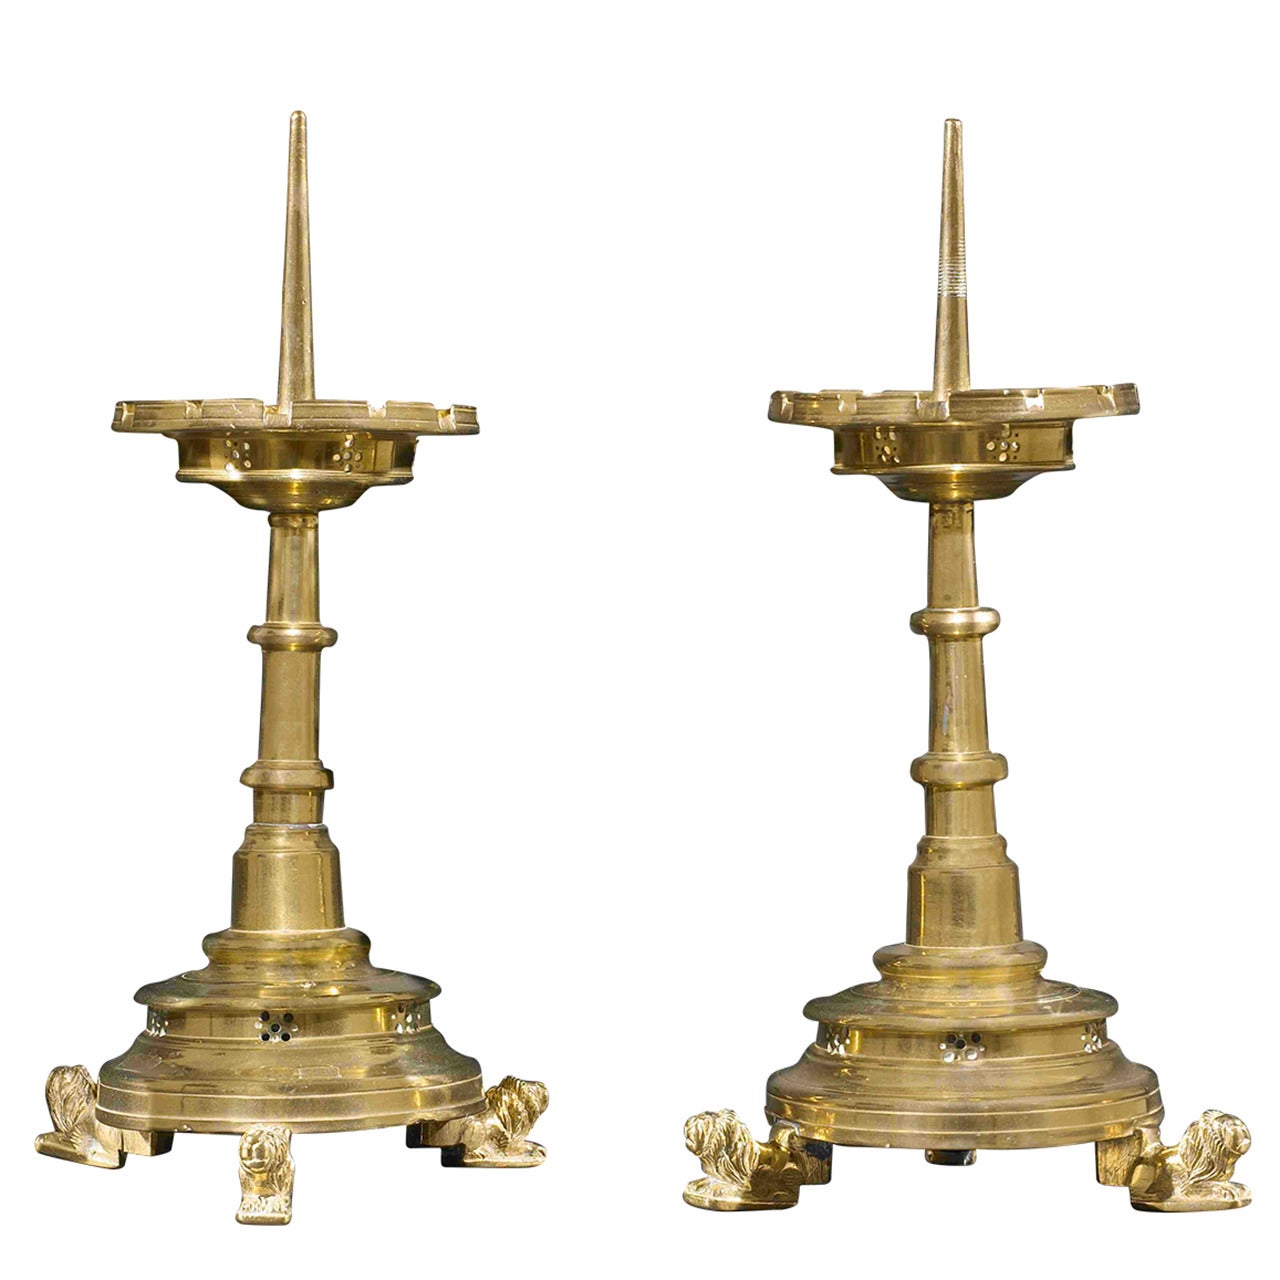 Pair of Flemish Yellow Brass Candlesticks Standing on Three Chiseled Lions Feet